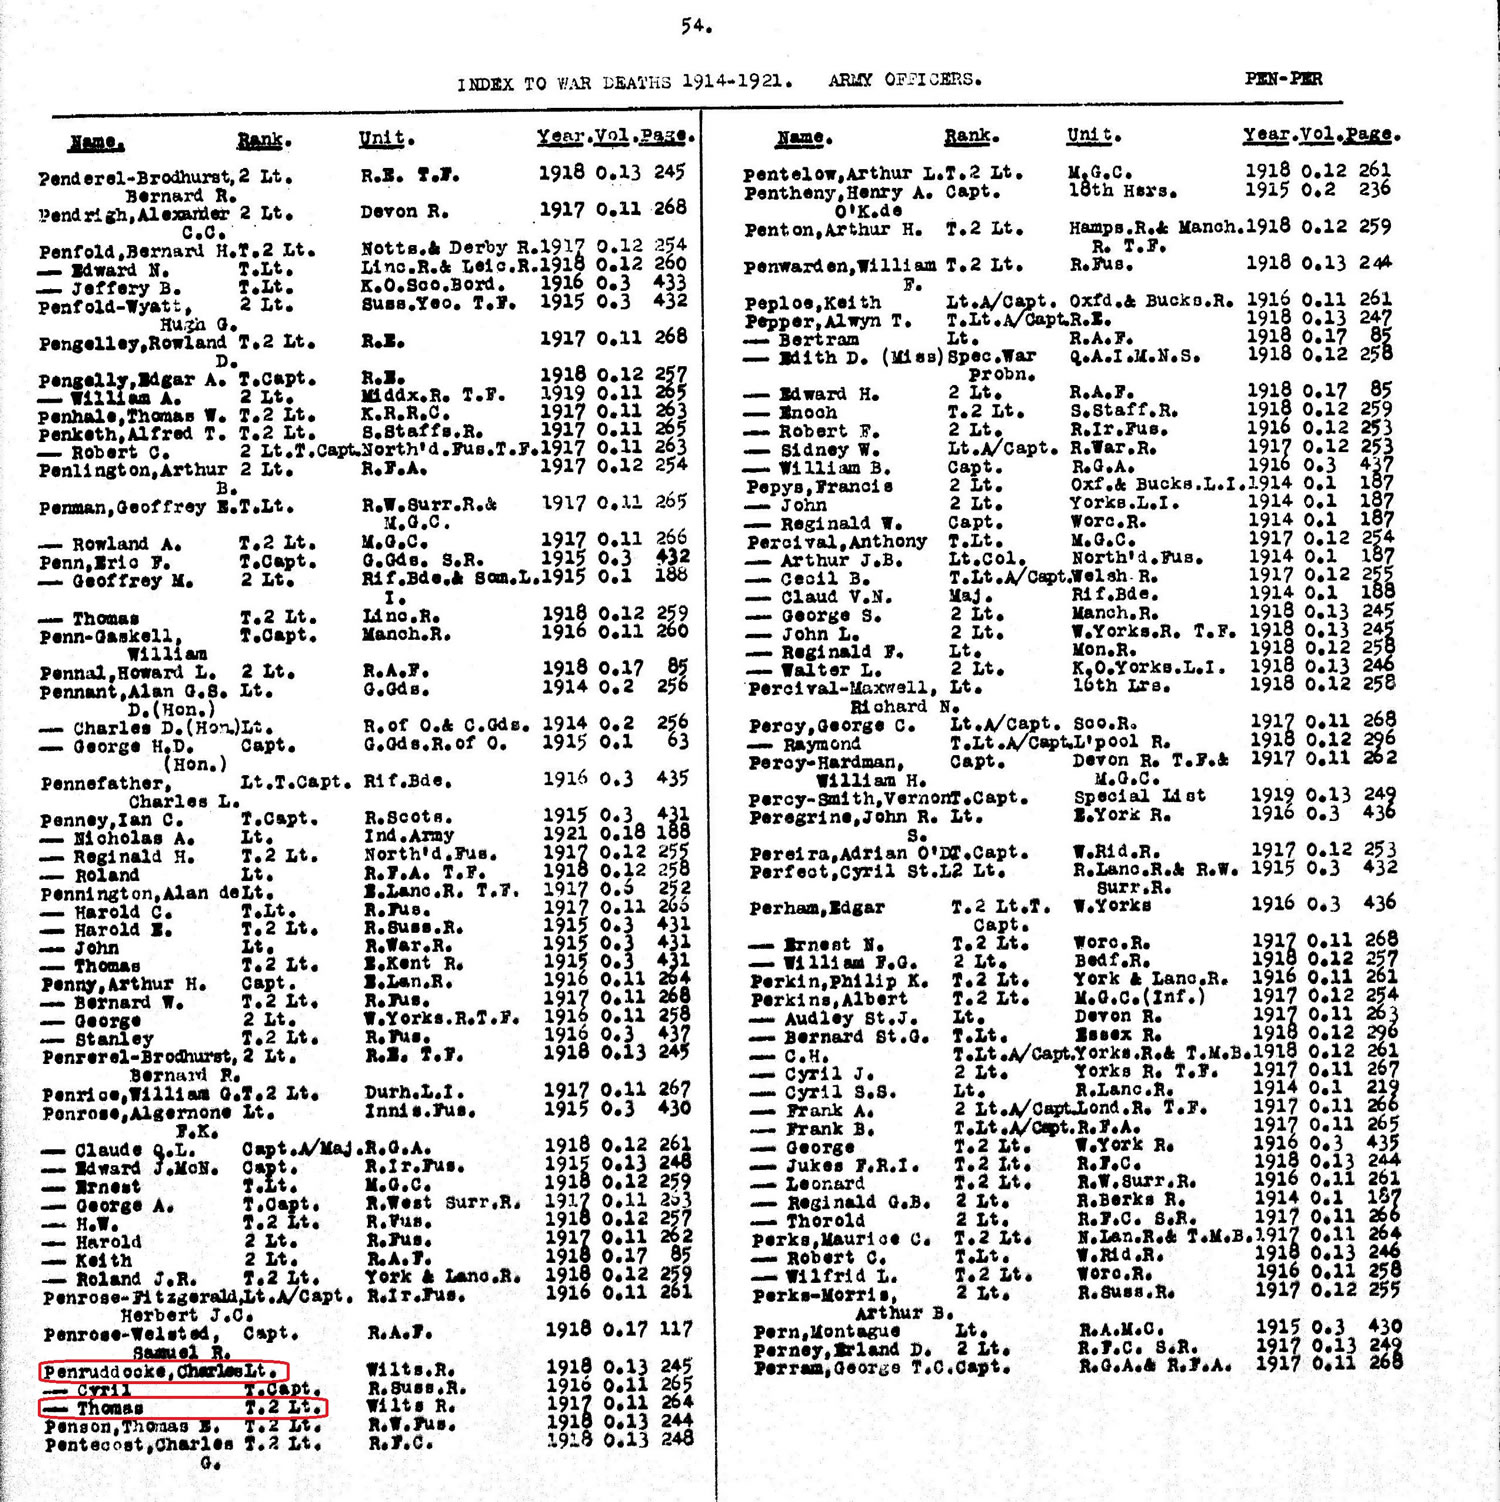 Both brothers on the same page of the GRO Index to War Deaths, Army Officers